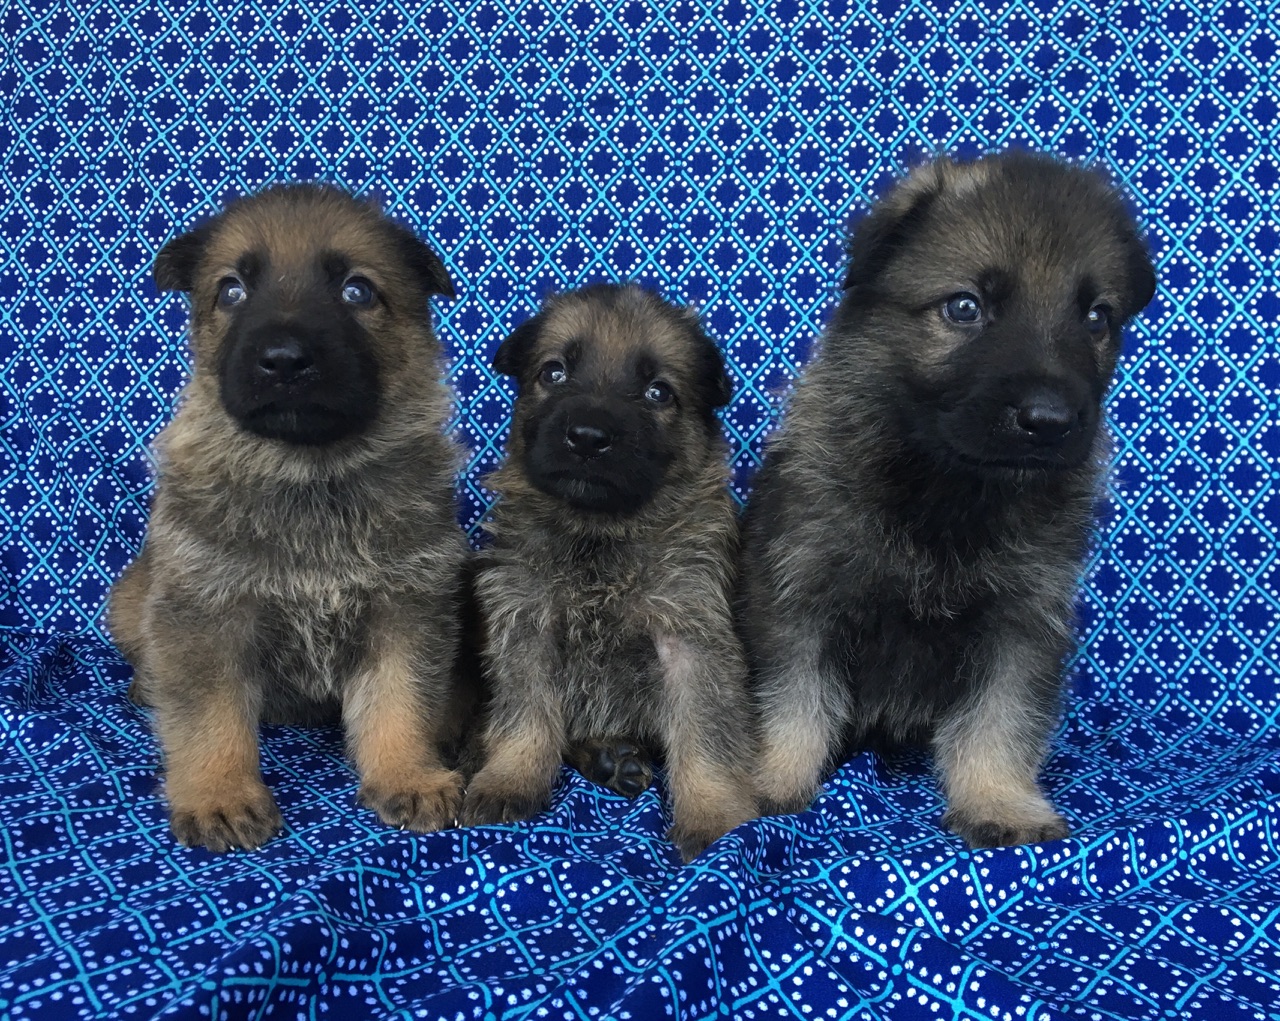 German Shepherd Puppies for sale Poplarville Mississippi PSD Kennels